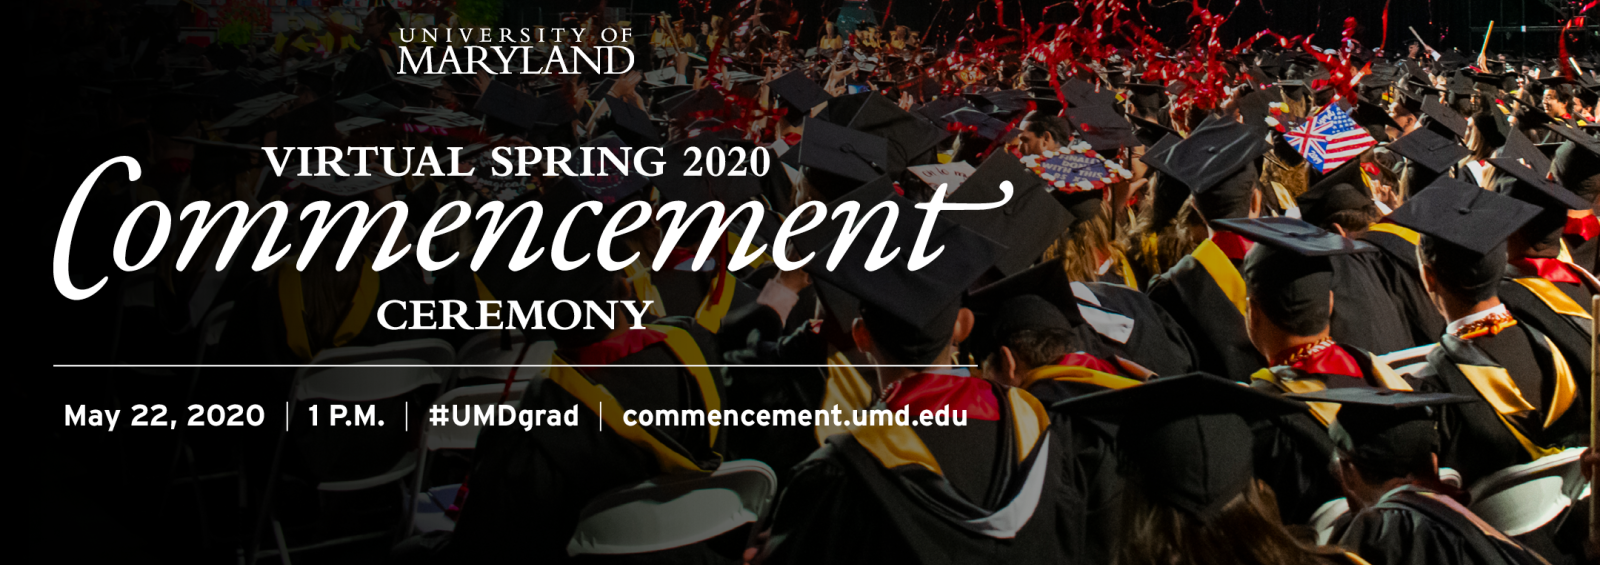 UMD Spring 2020 Virtual Commencement UMD College of Education